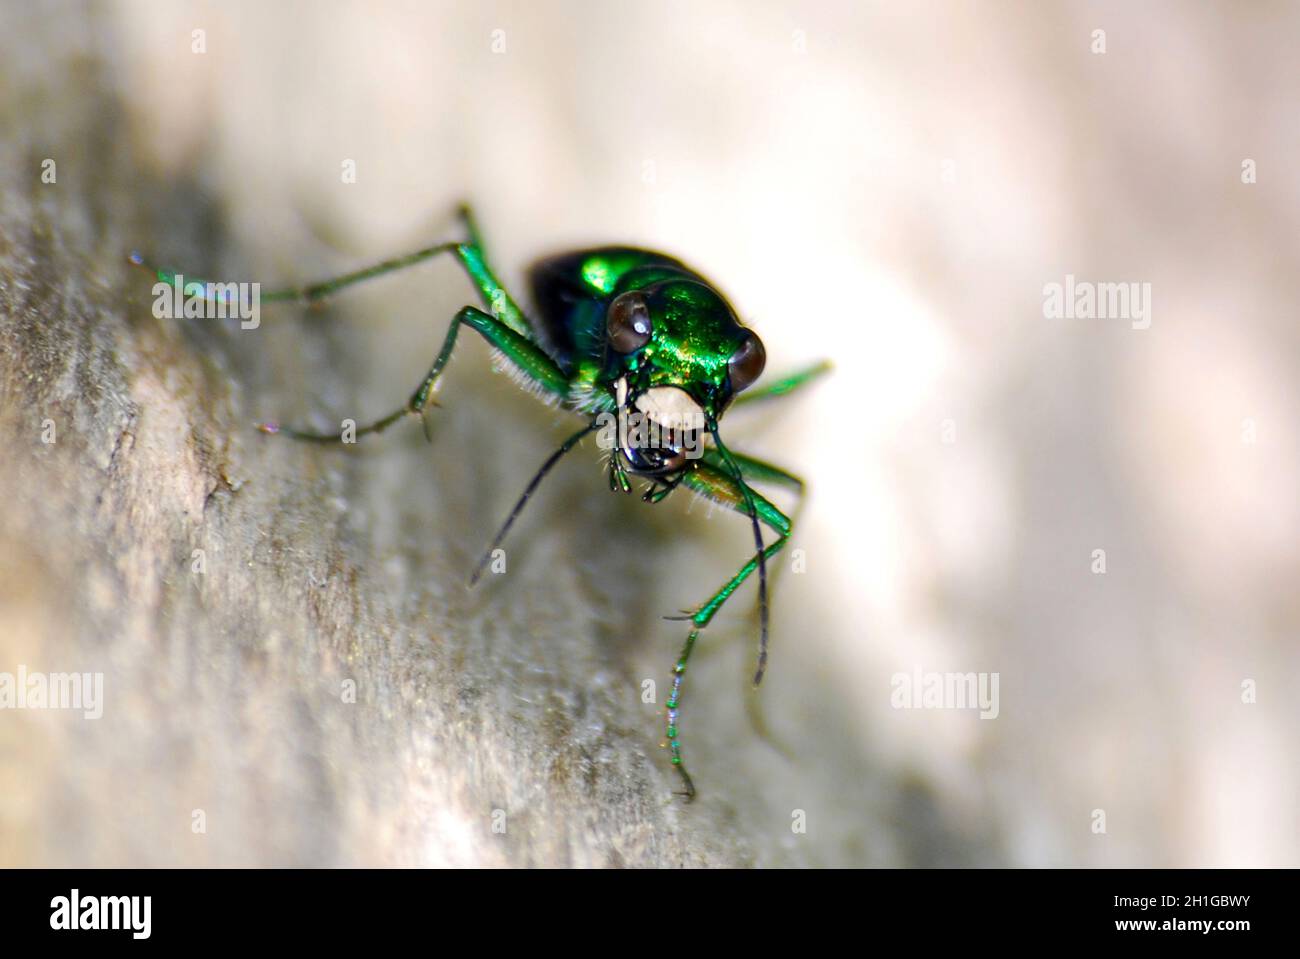 Six Spotted Green Tiger Beetle isoliert Nahaufnahme Stockfoto